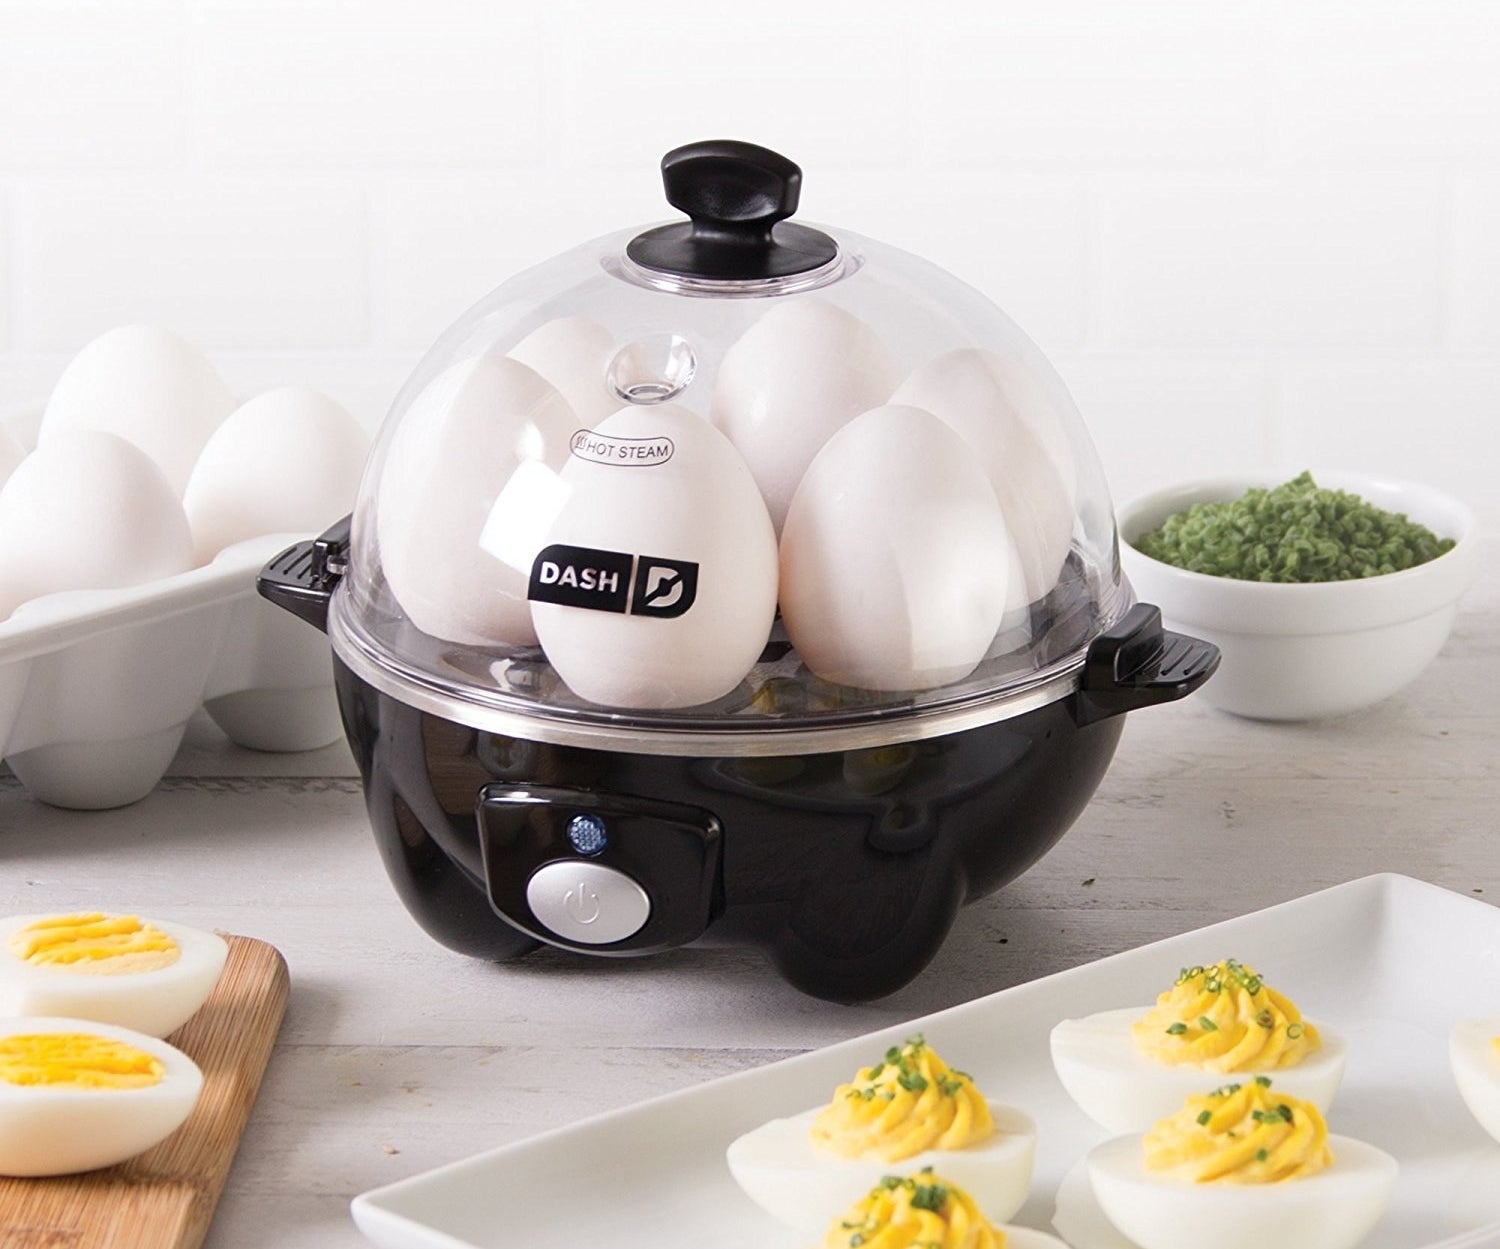 The egg cooker with six eggs in it, plus a plate of deviled eggs